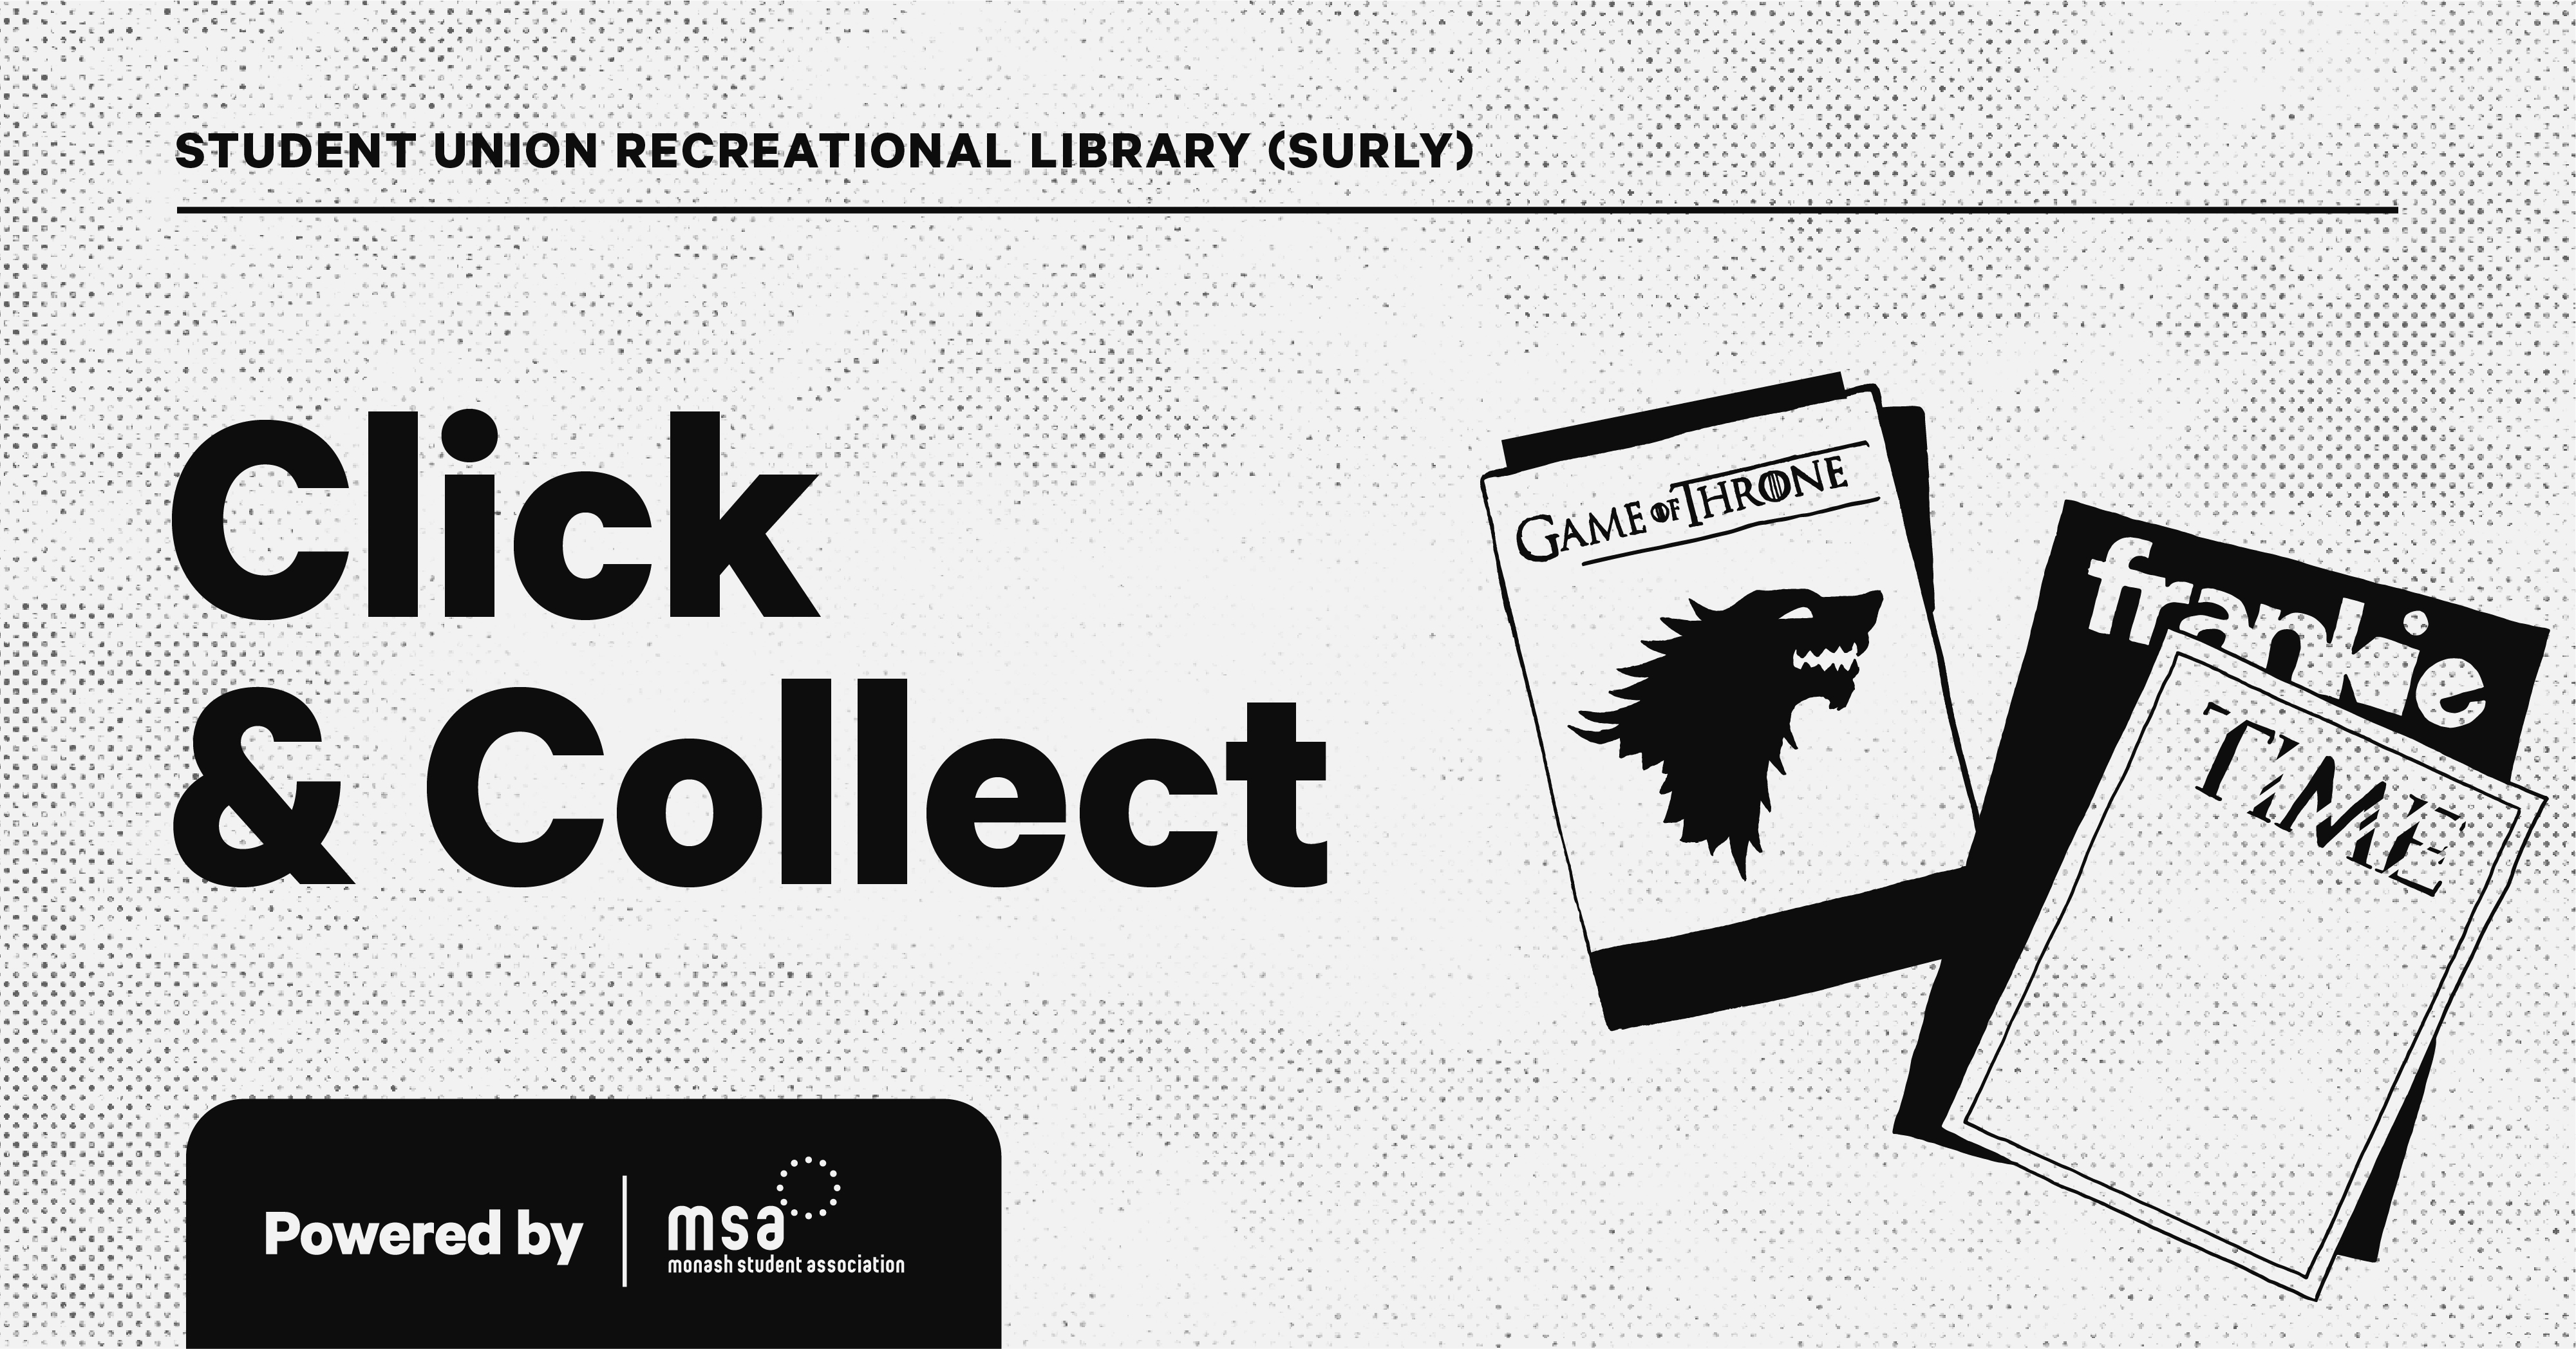 SURLY Click & Collect: How to Request Books